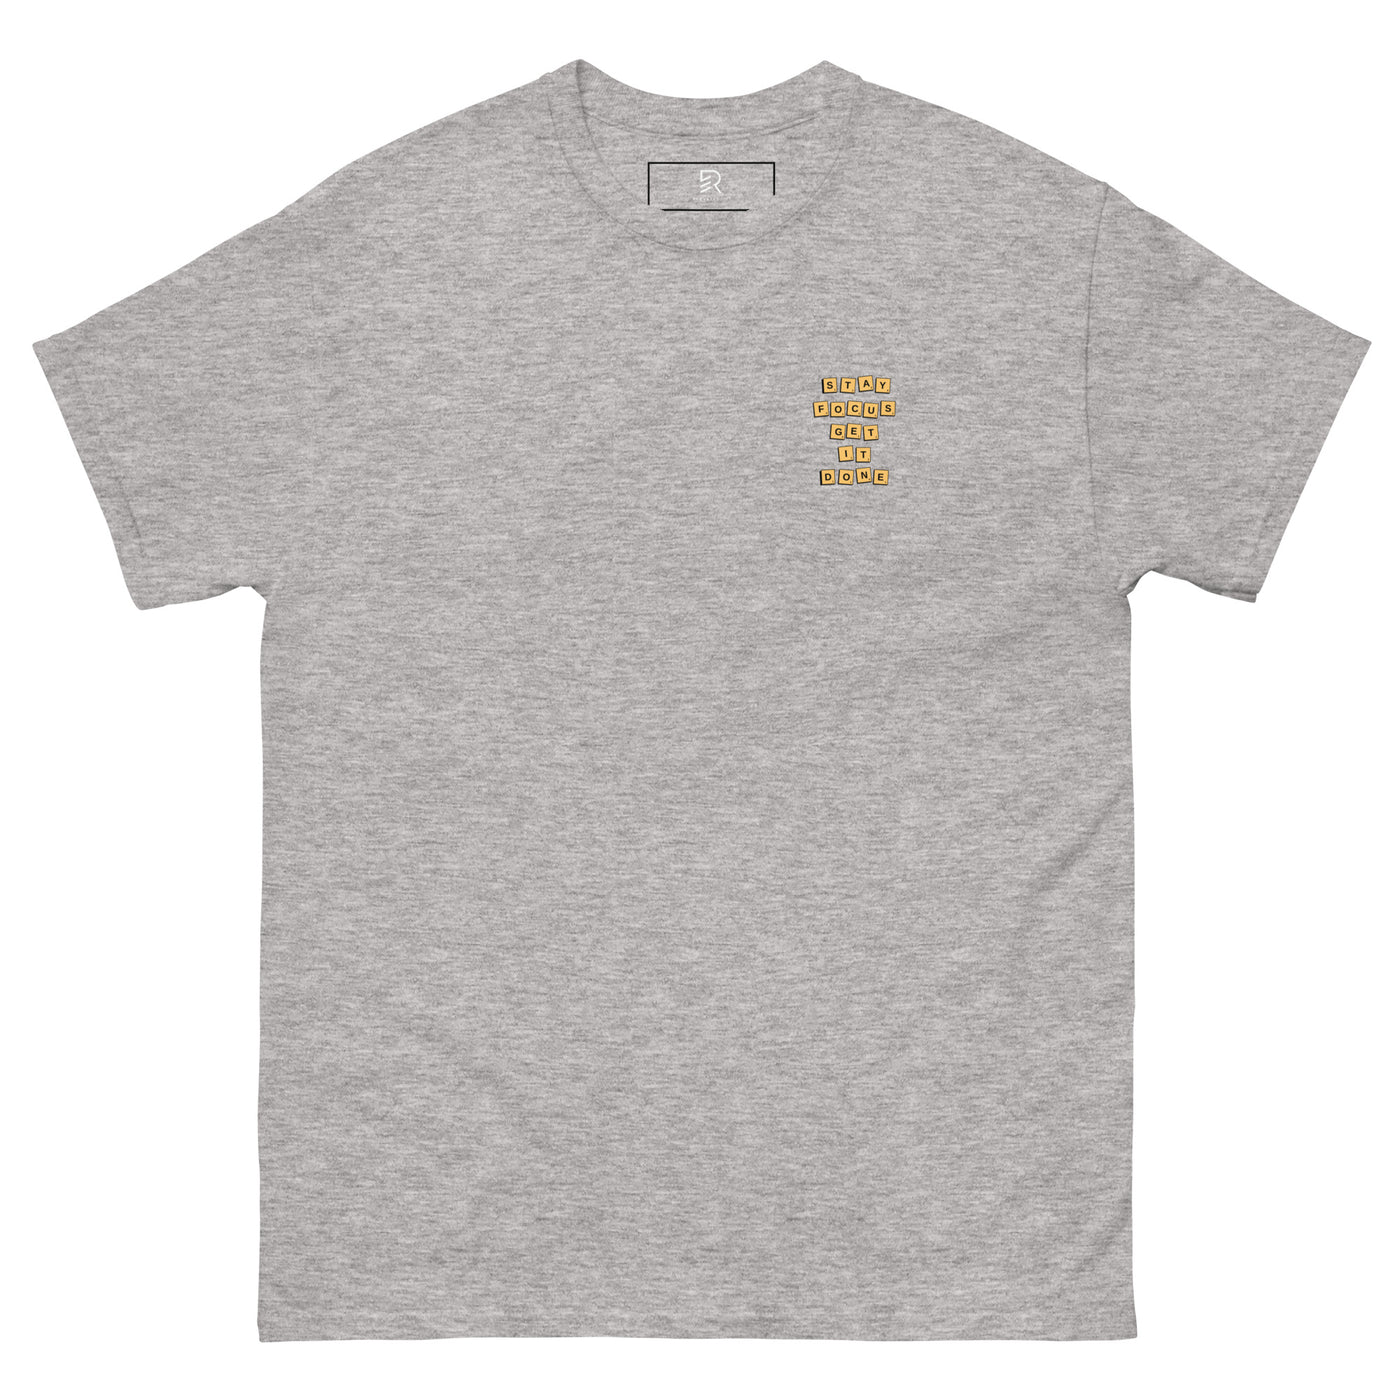 Men’s Classic Grey Tee - Stay Focus Get It Done